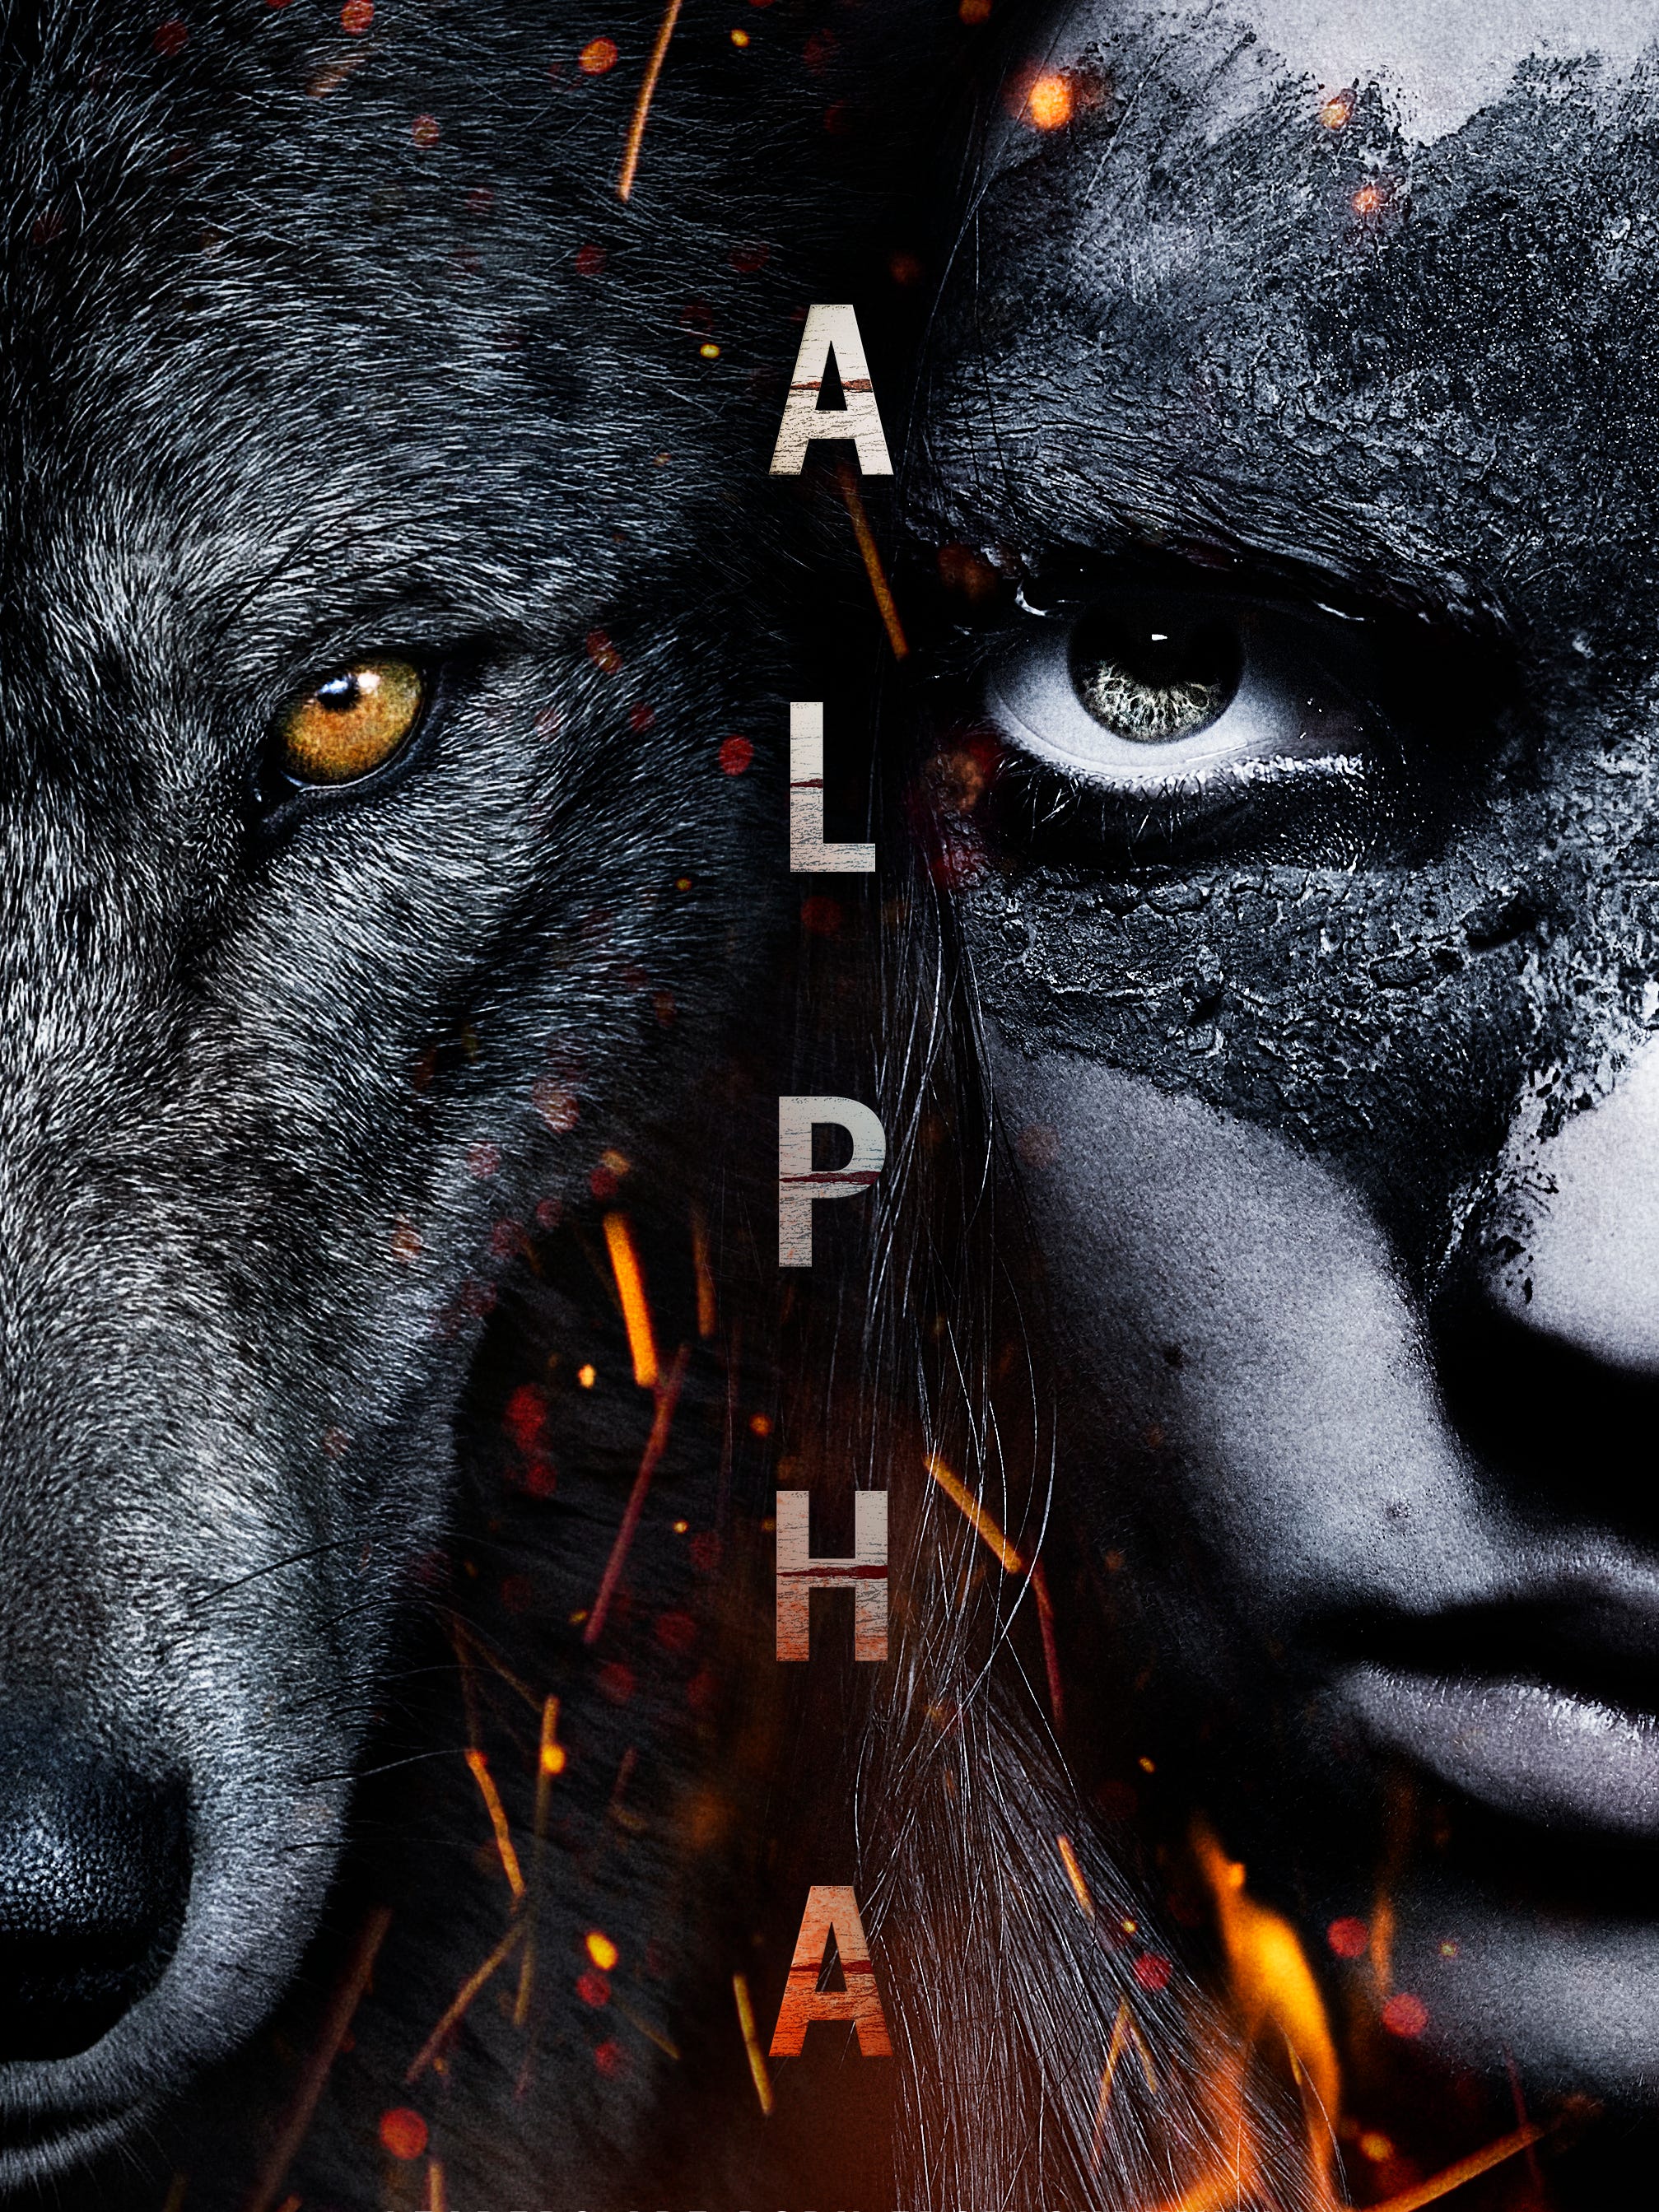 Alpha' trailer reveal shows humans and canines first coming together